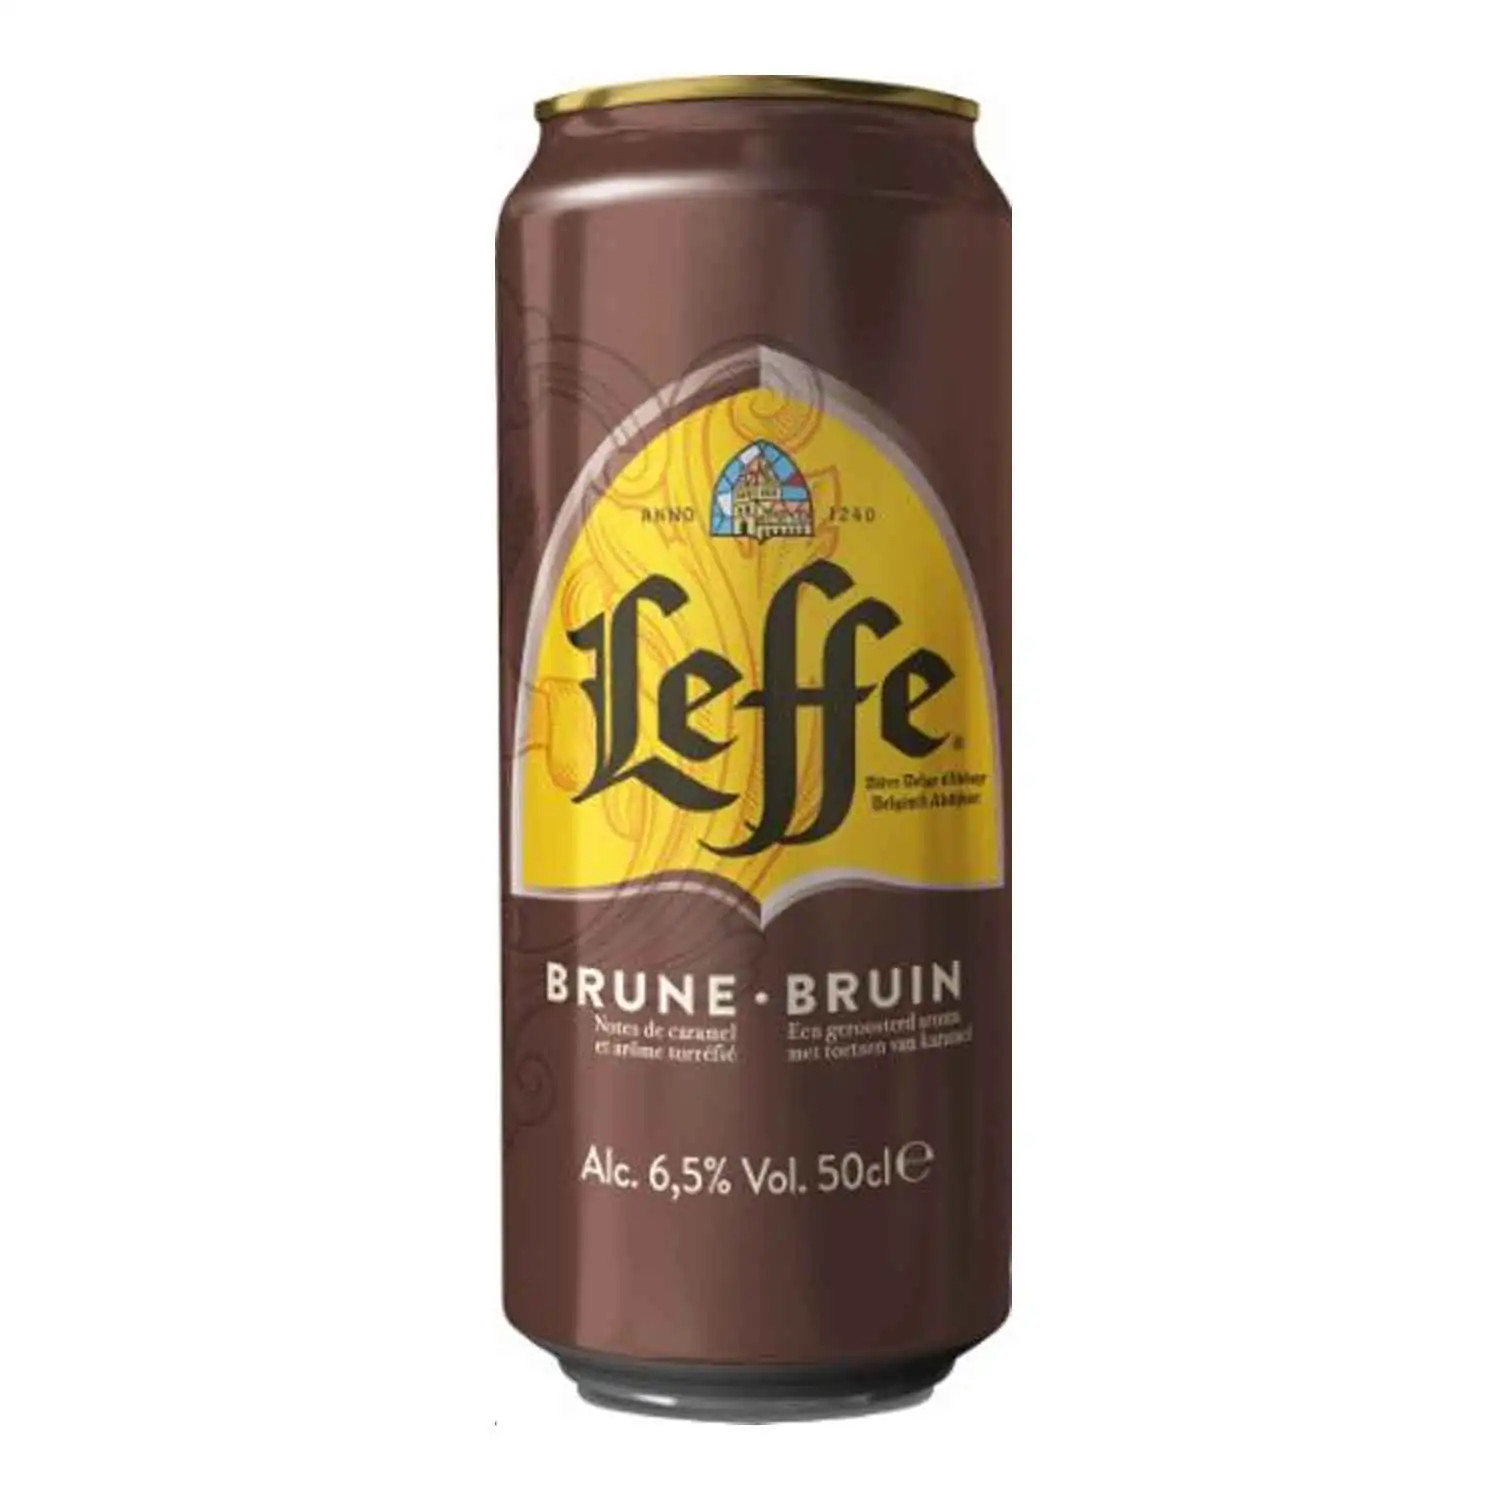 Leffe brown 50cl Alc 6,5% - Buy at Real Tobacco